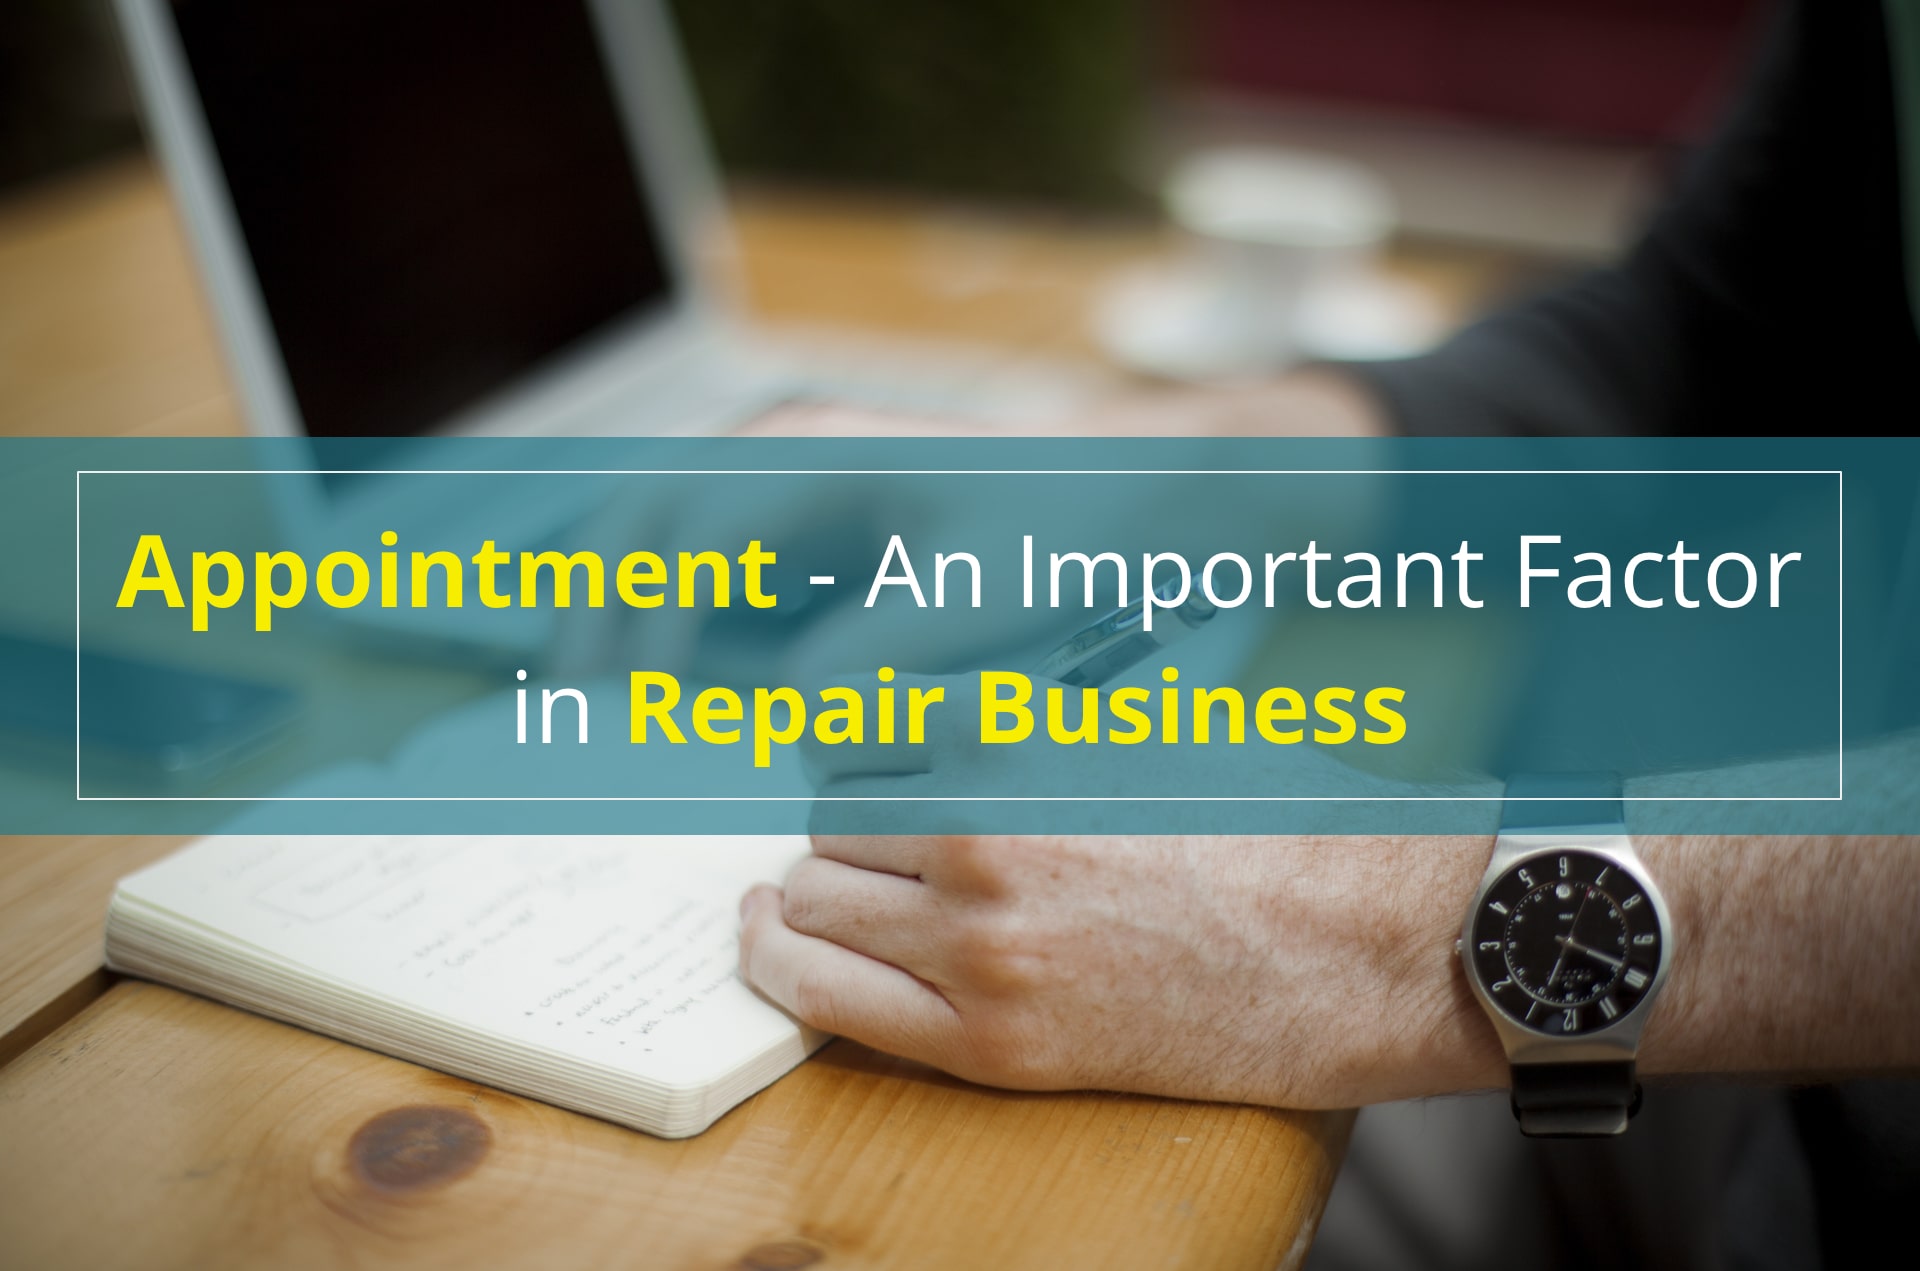 Role of appointments in a repair businesses - RepairRabbit